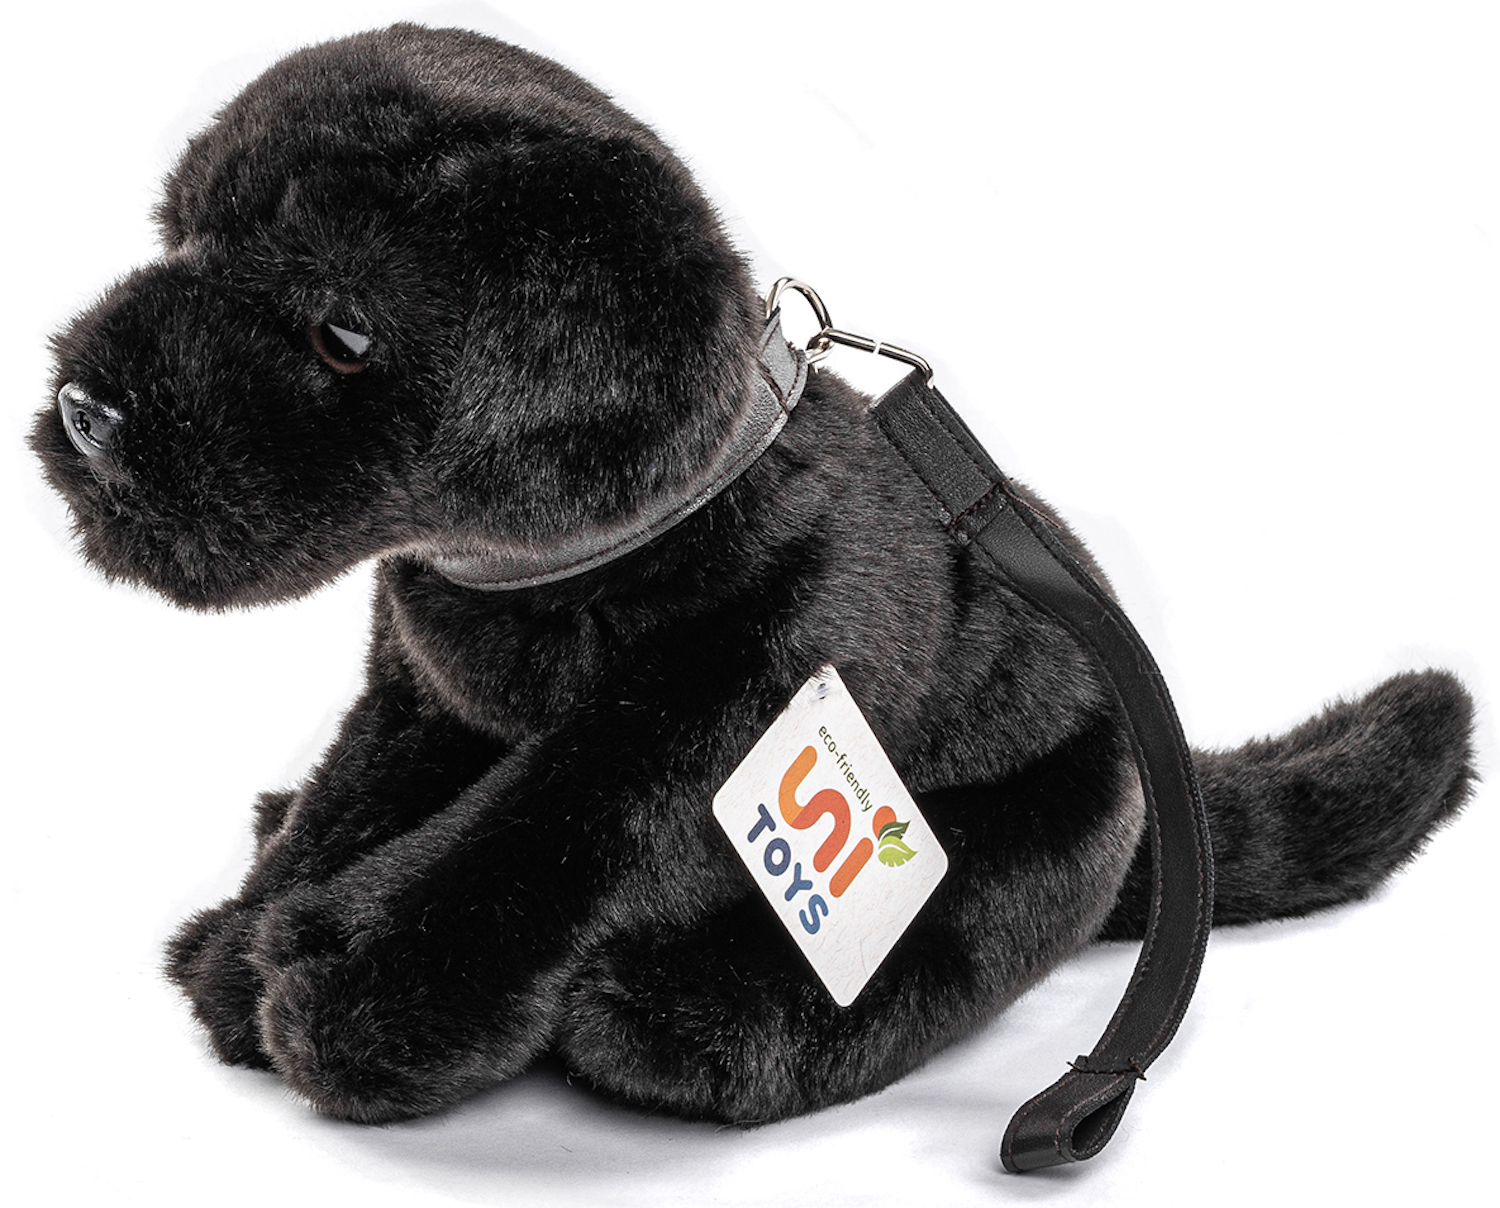 Labrador puppy (black), with leash - 23 cm (height)